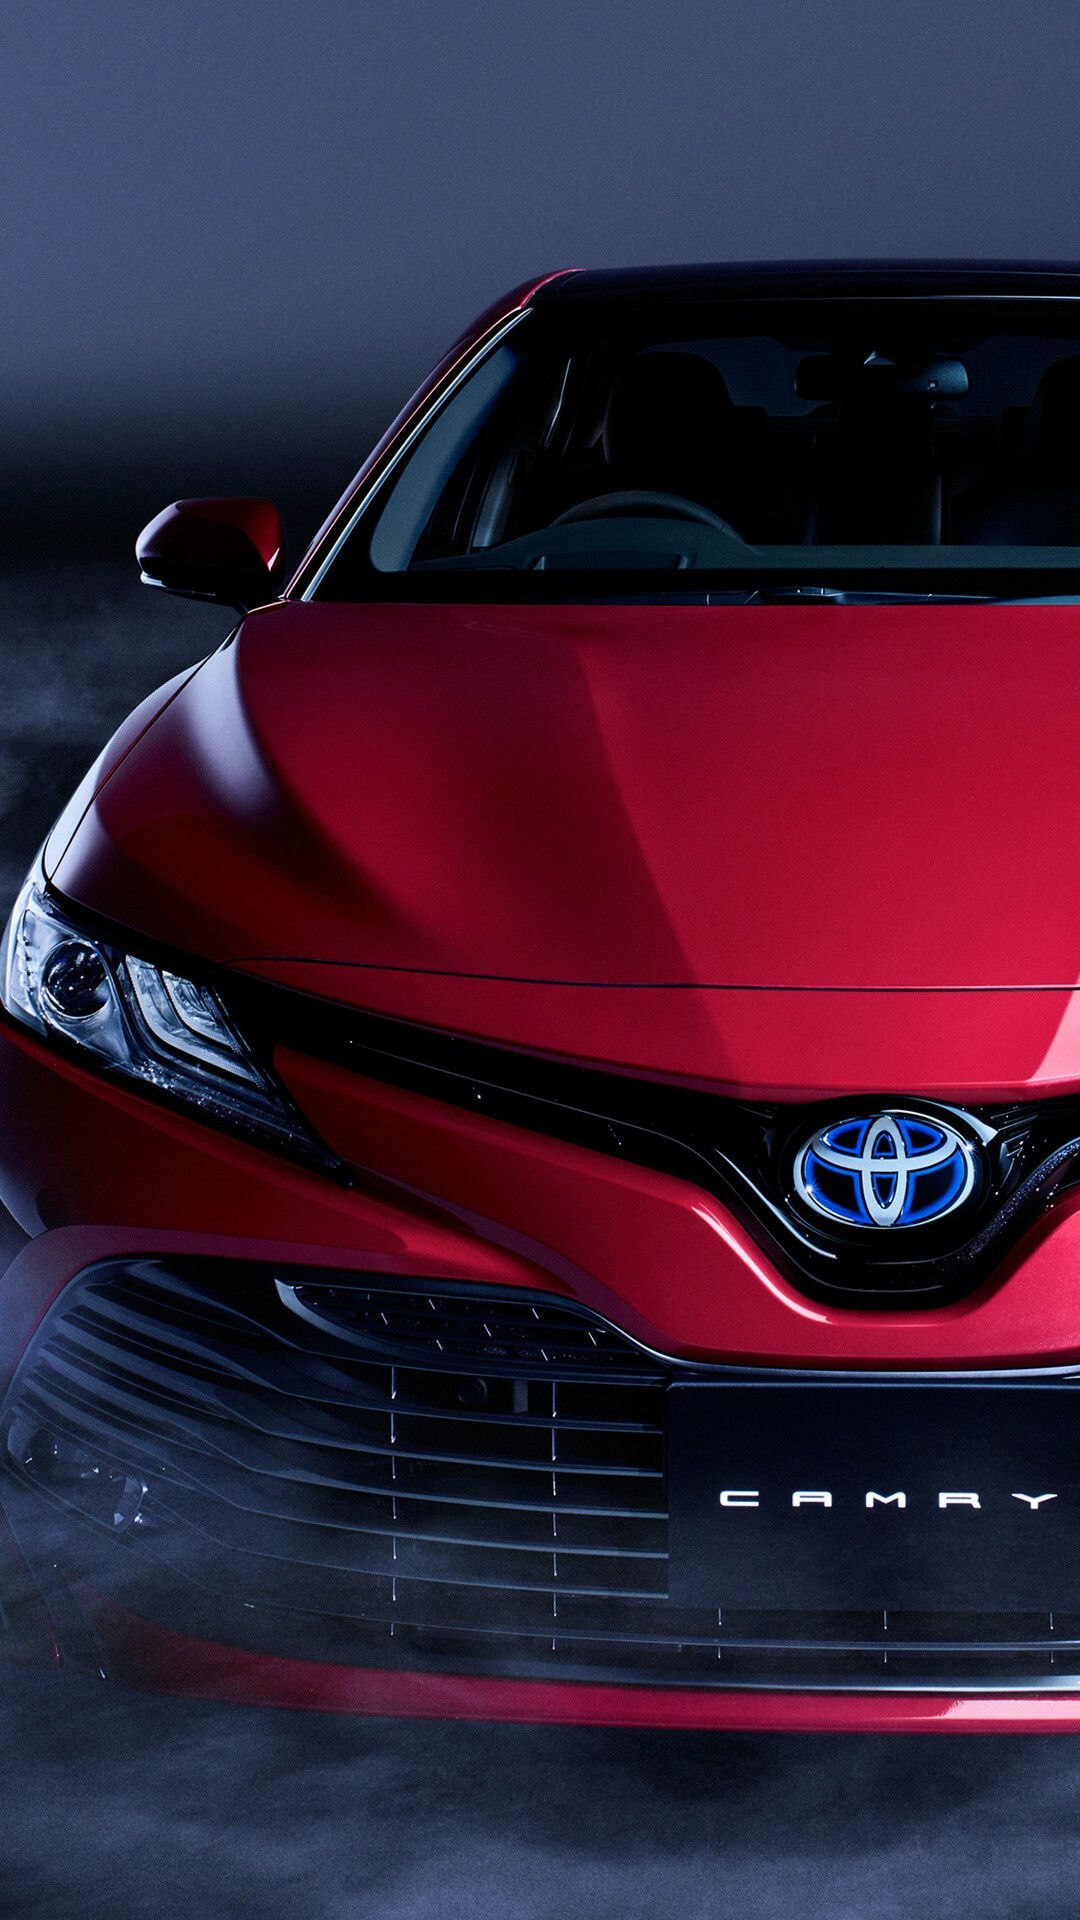 Toyota: Camry, Has been extolled as the firm's second "world car" after the Corolla. 1080x1920 Full HD Background.